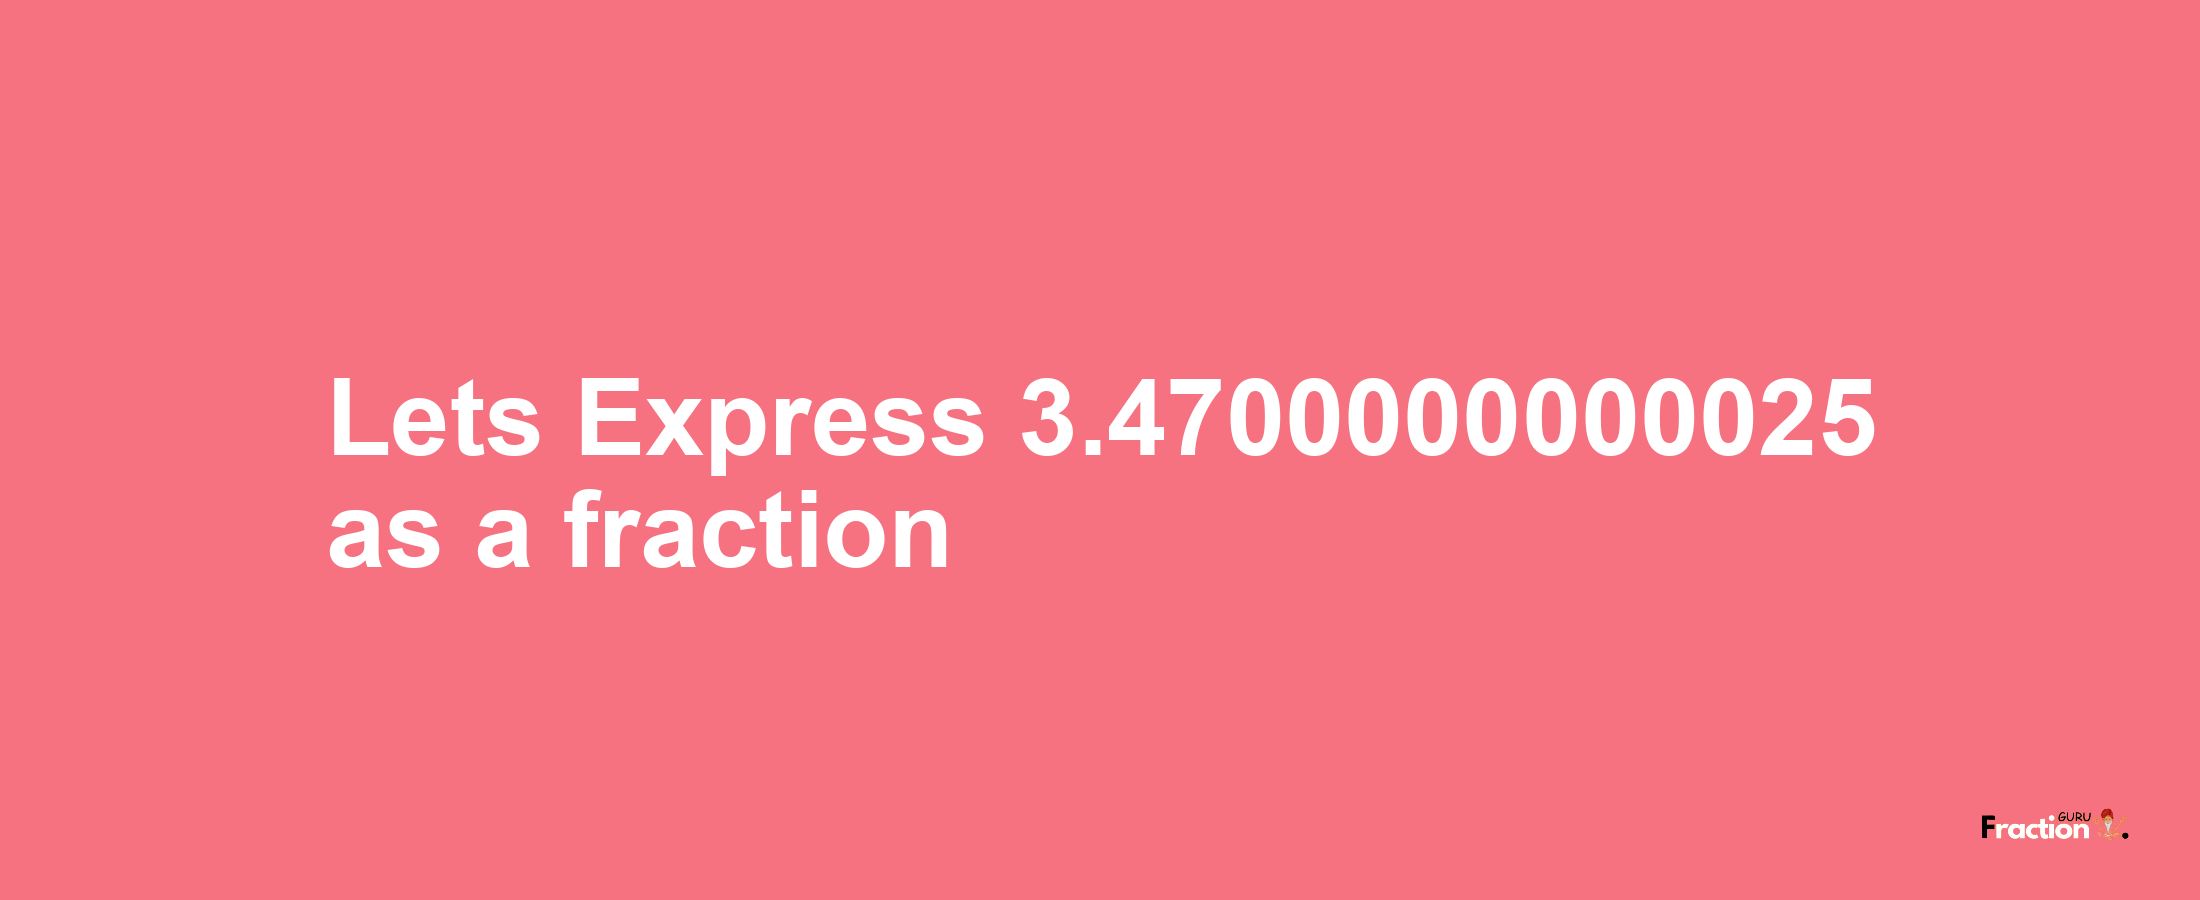 Lets Express 3.4700000000025 as afraction